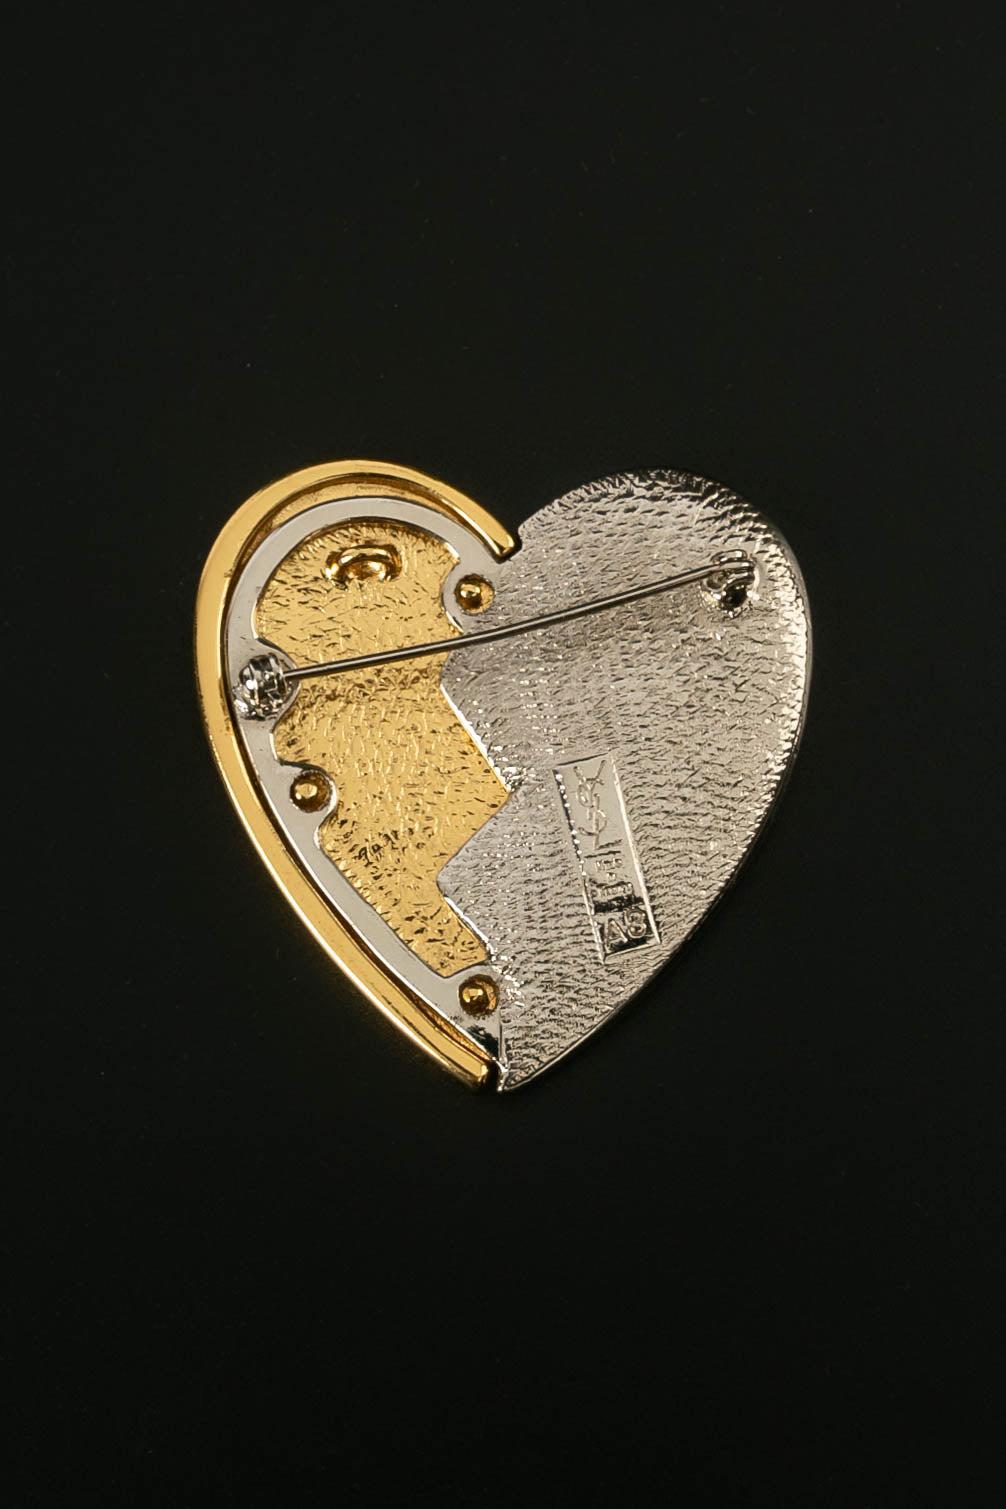 Yves Saint Laurent - (Made in France) Heart shaped brooch/pendant in gold and silver metal paved with rhinestones.

Additional information:
Condition: Very good condition
Dimensions: 5,5 cm (2,16 in) x 5,2 cm (2,04 in)

Seller Reference: BR68
